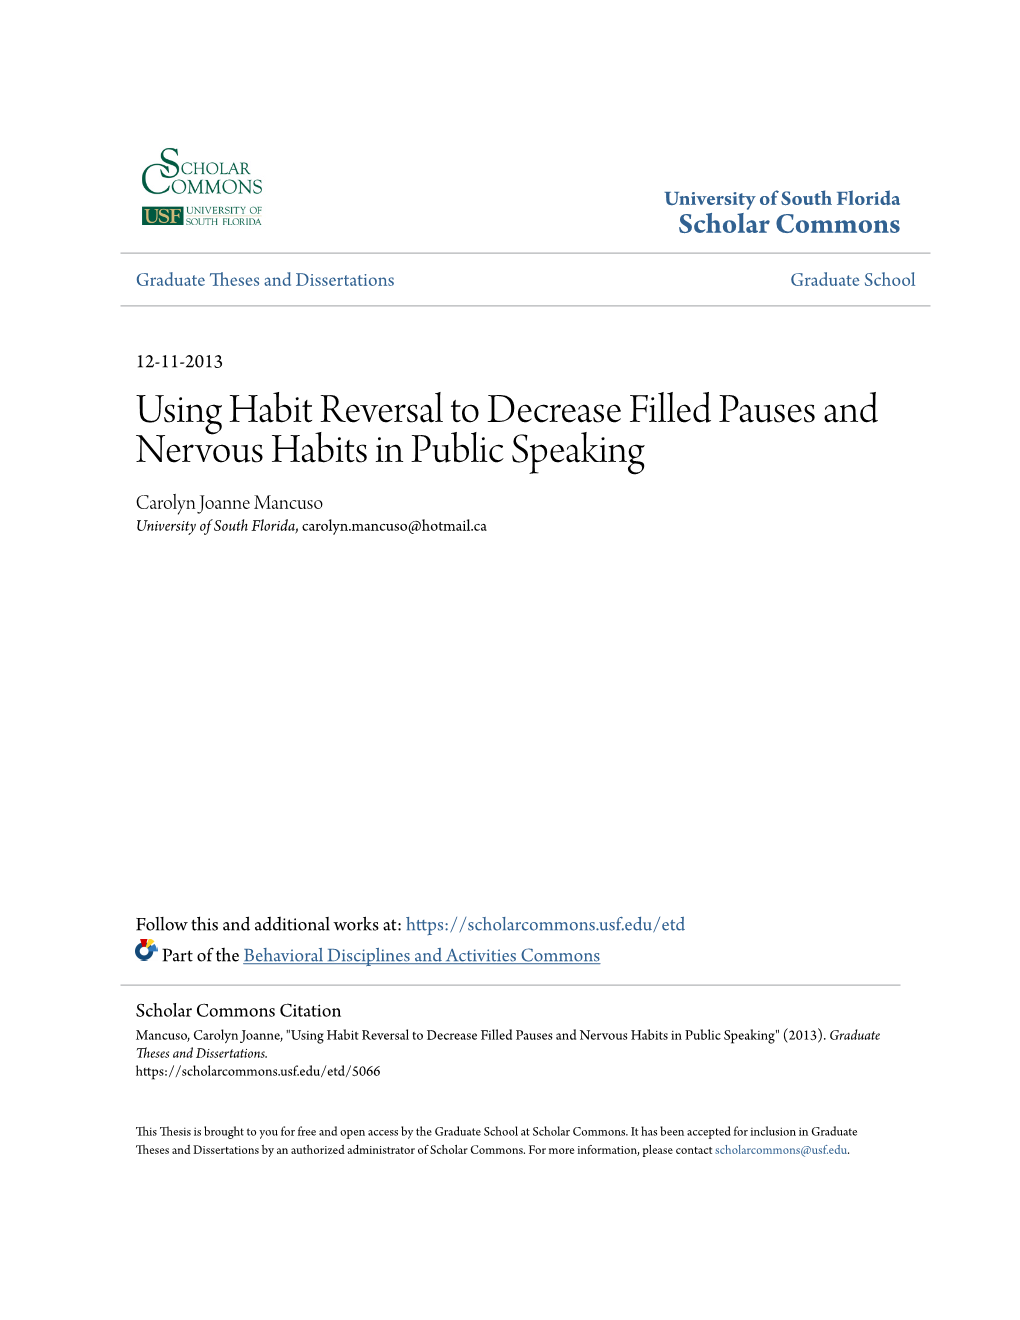 Using Habit Reversal to Decrease Filled Pauses and Nervous Habits in Public Speaking Carolyn Joanne Mancuso University of South Florida, Carolyn.Mancuso@Hotmail.Ca